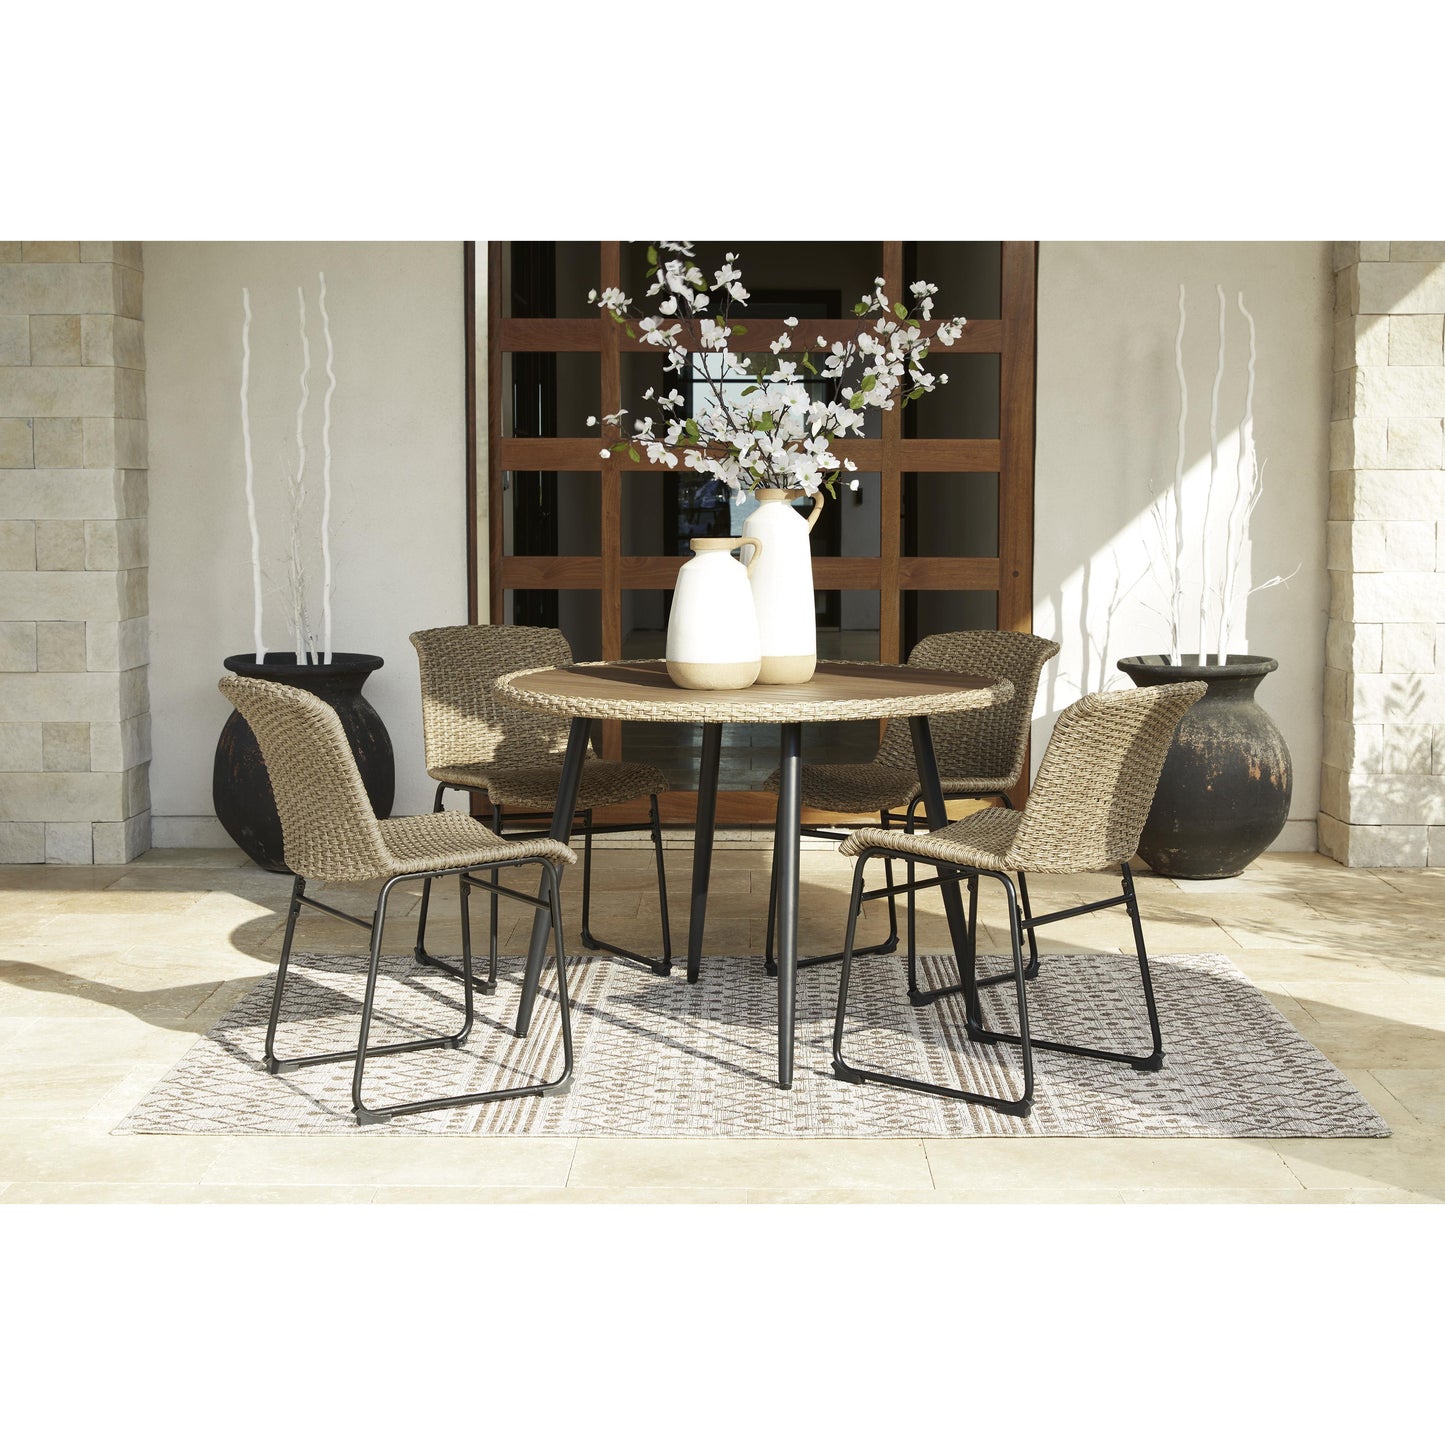 Signature Design by Ashley Outdoor Seating Dining Chairs P369-601 IMAGE 7